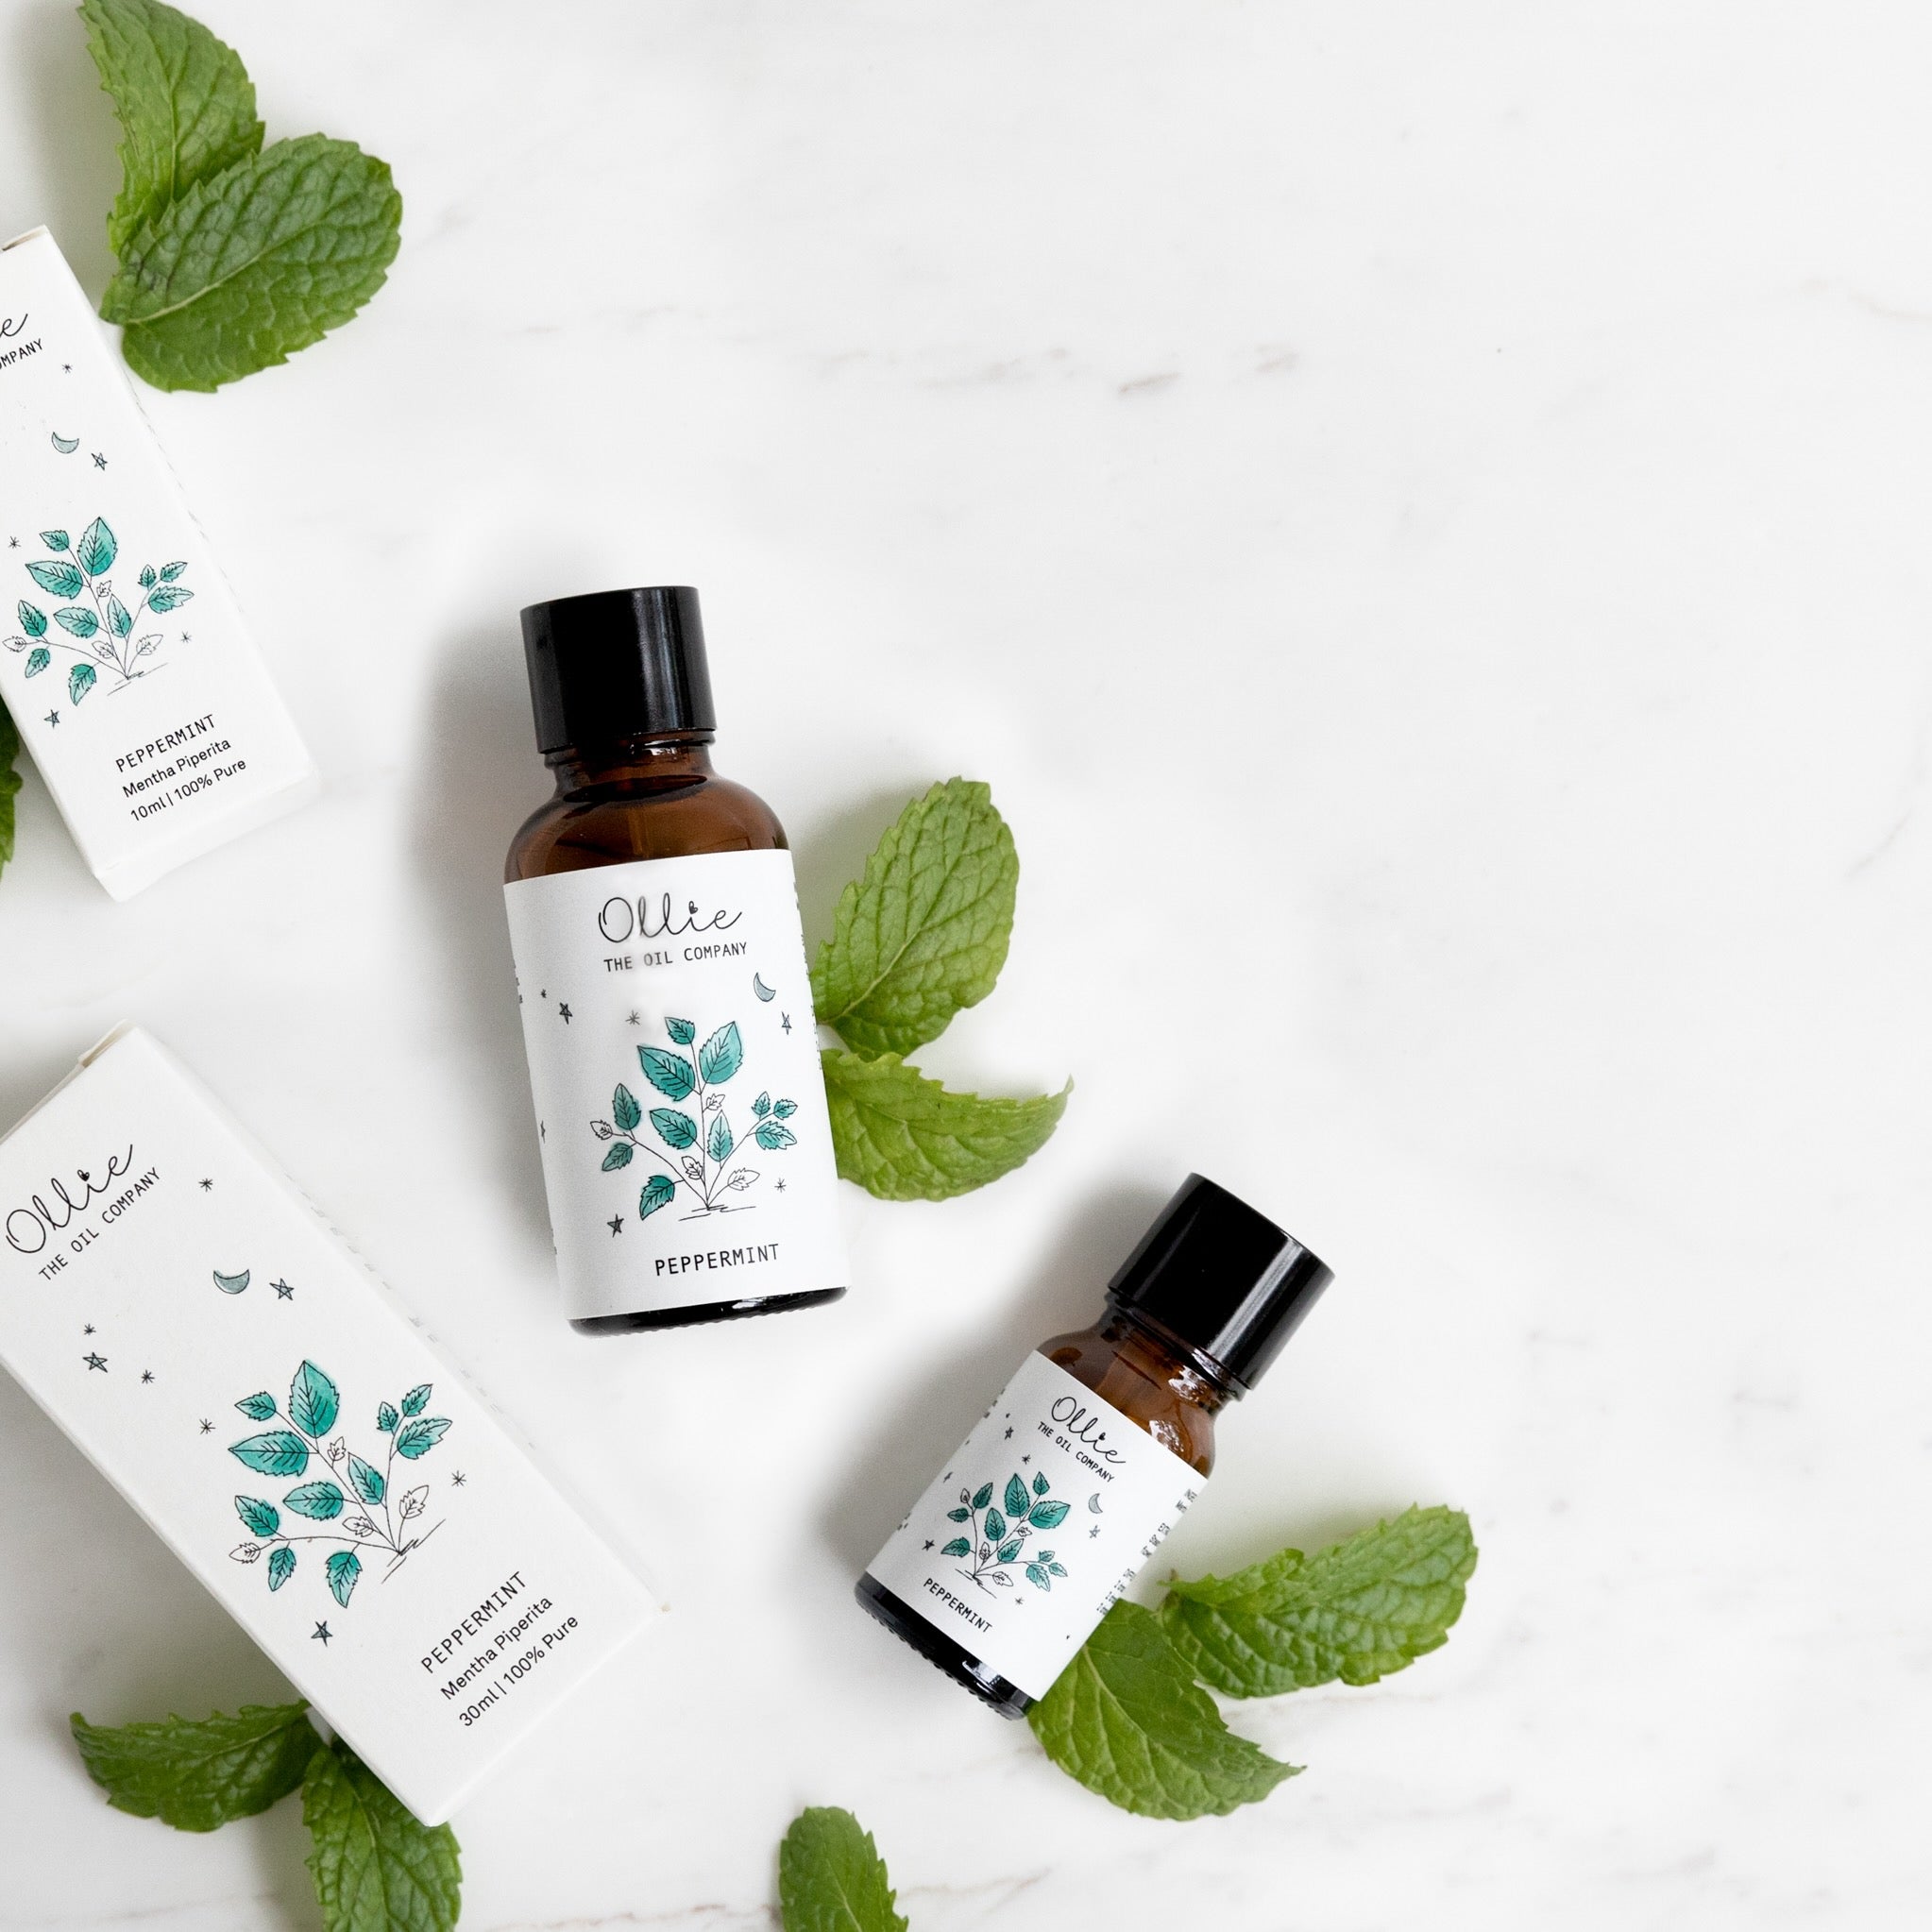 Ollie Peppermint Oil | Skincare Oils | The Green Collective SG